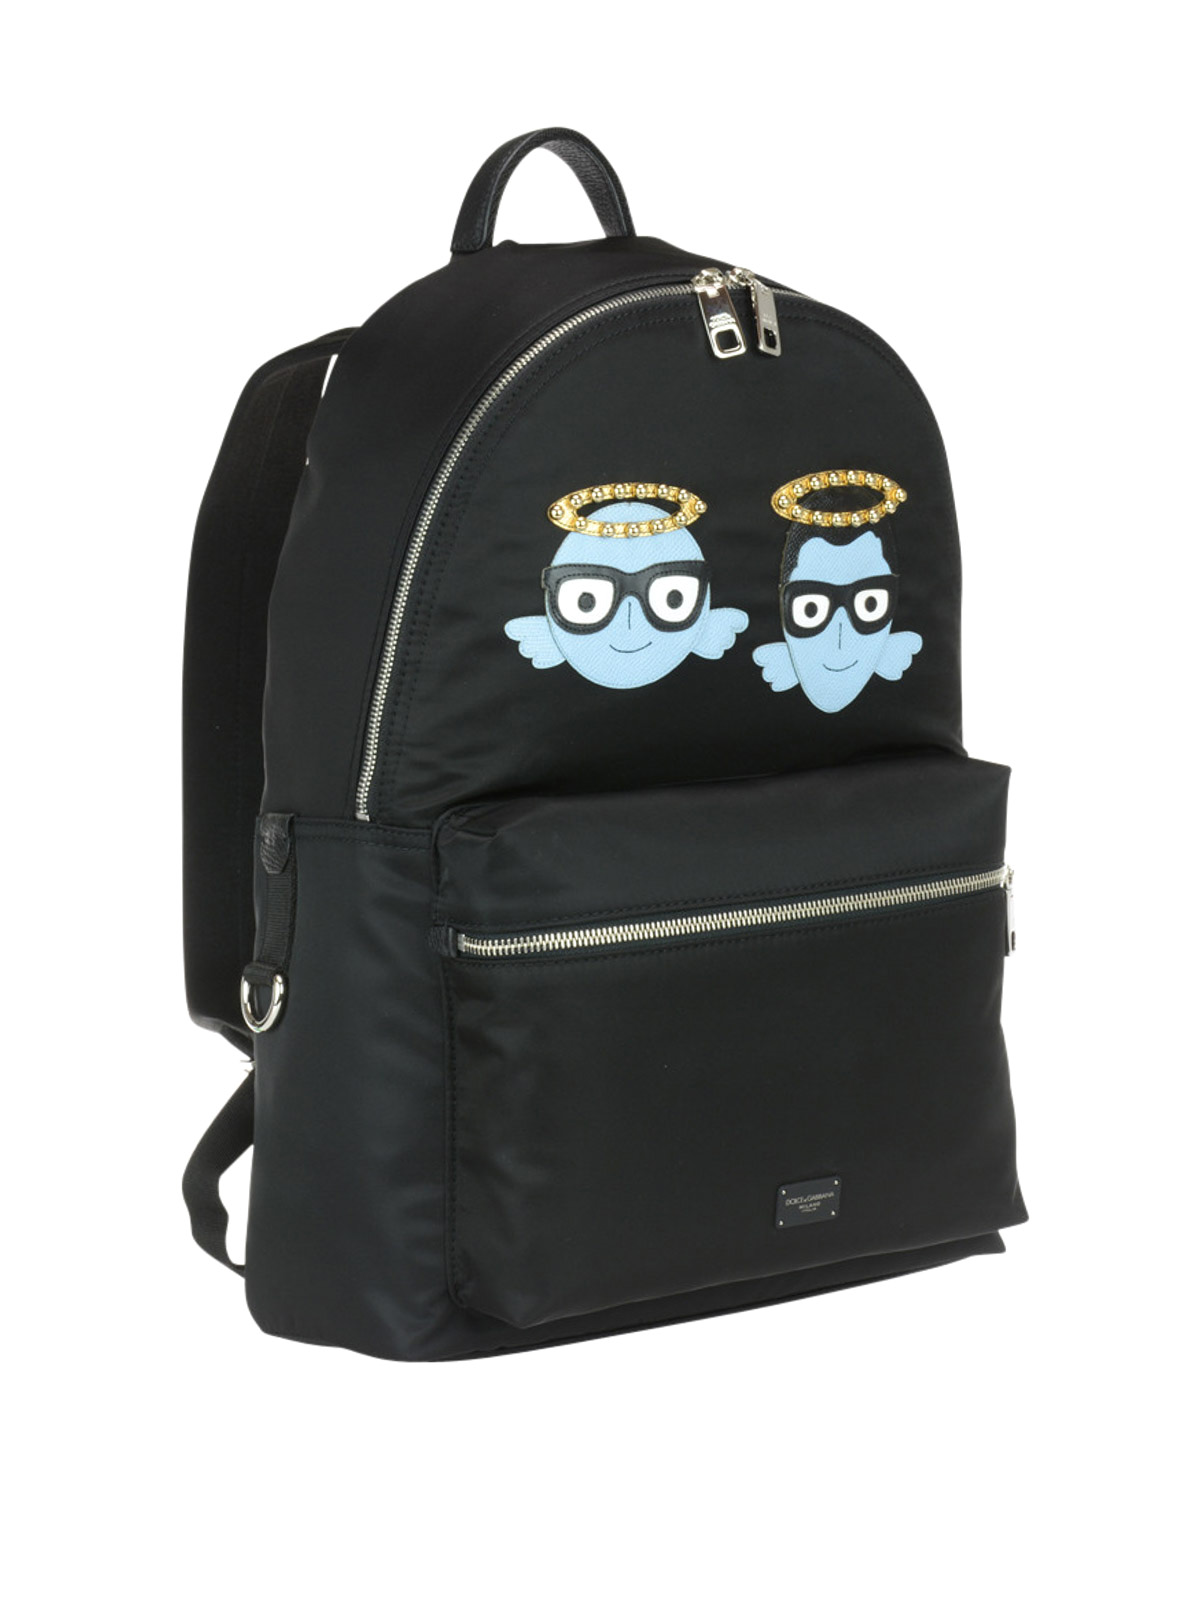 Backpacks Dolce & Gabbana - Nylon backpack with #DGFamily patch -  BM1419AM6138B956